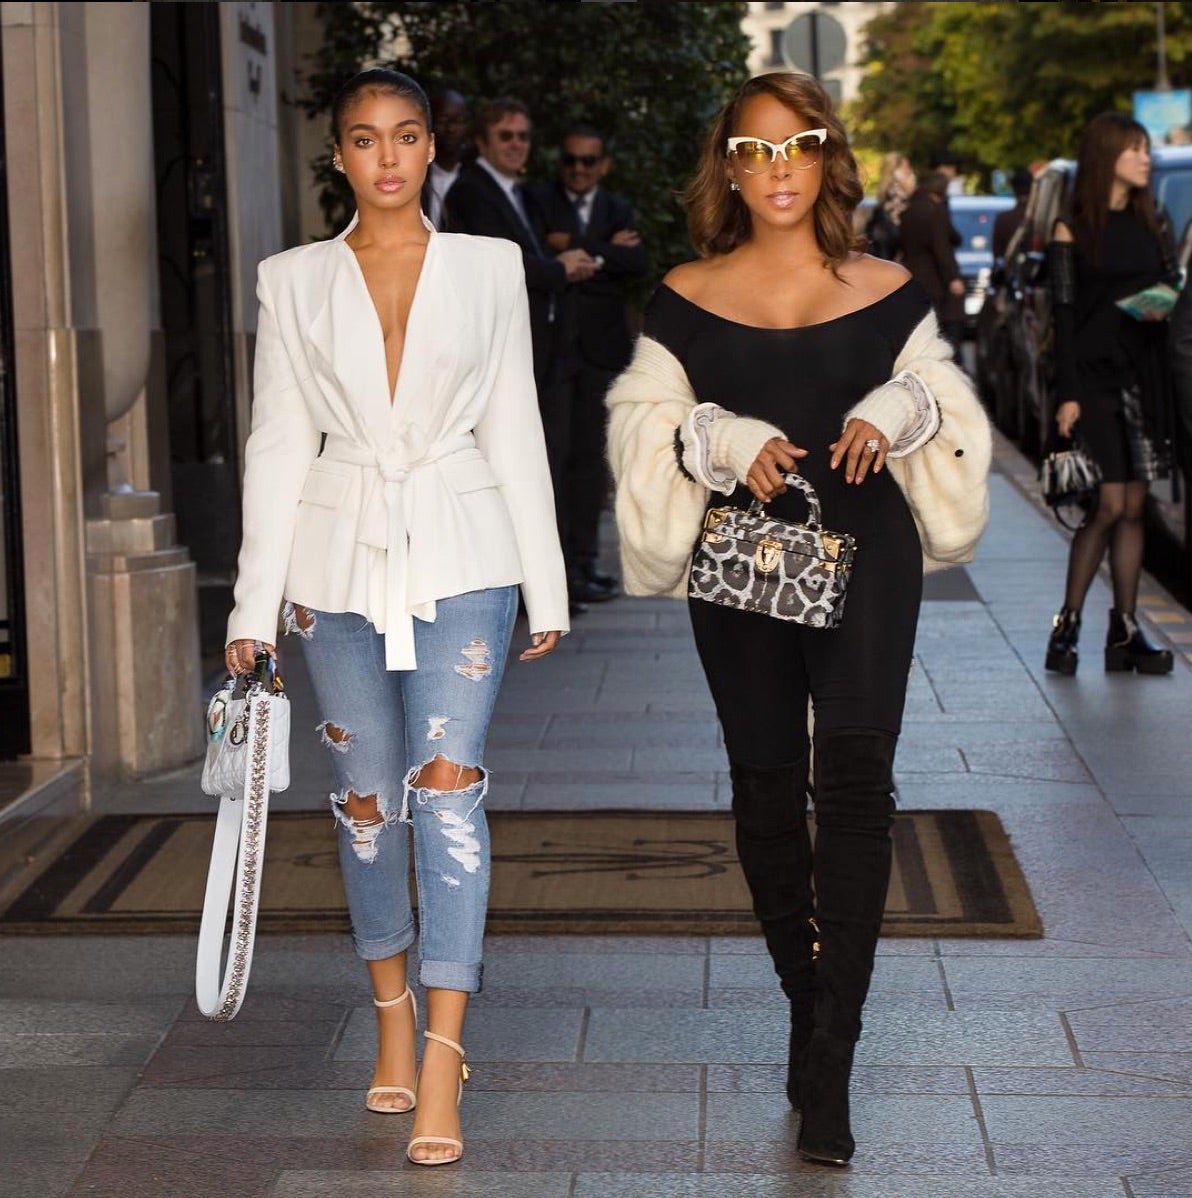 Marjorie and Lori Harvey May Be The Chicest Mother-Daughter Duo - Essence